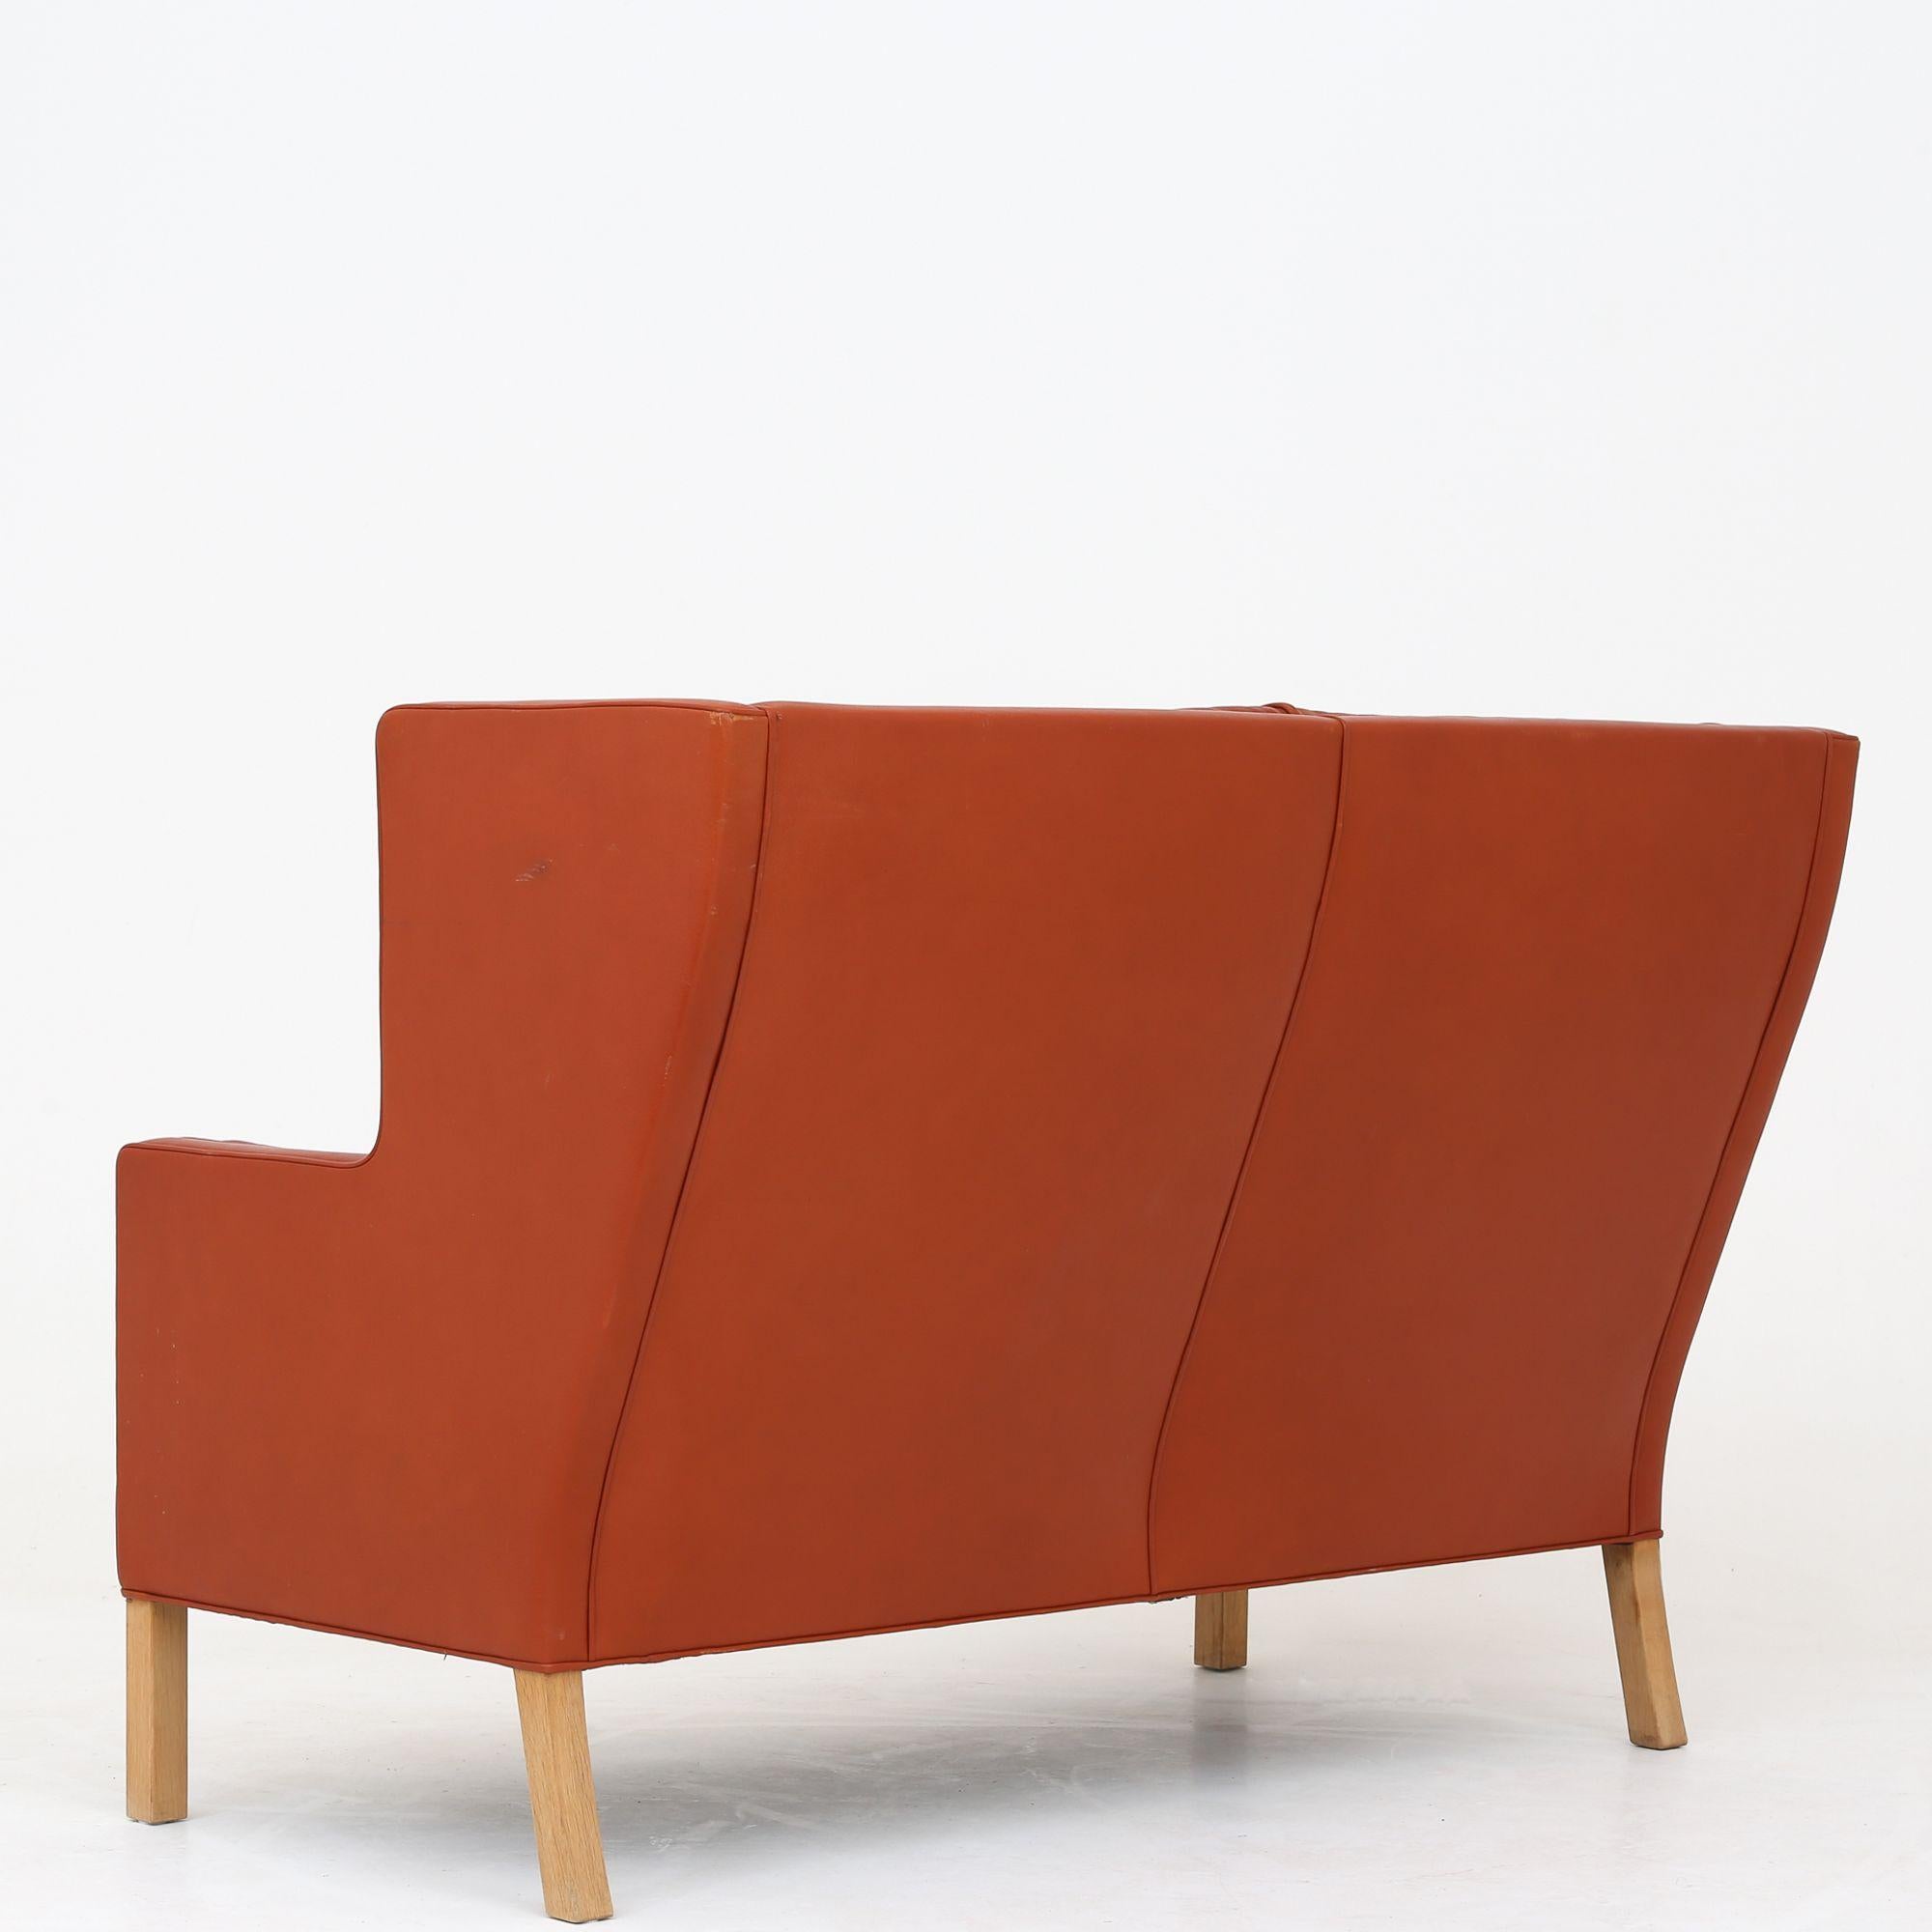 BM 2192 - 2-seater Coupe sofa in patinated, reddish-brown leather with oak legs. Børge Mogensen / Fredericia Furniture.